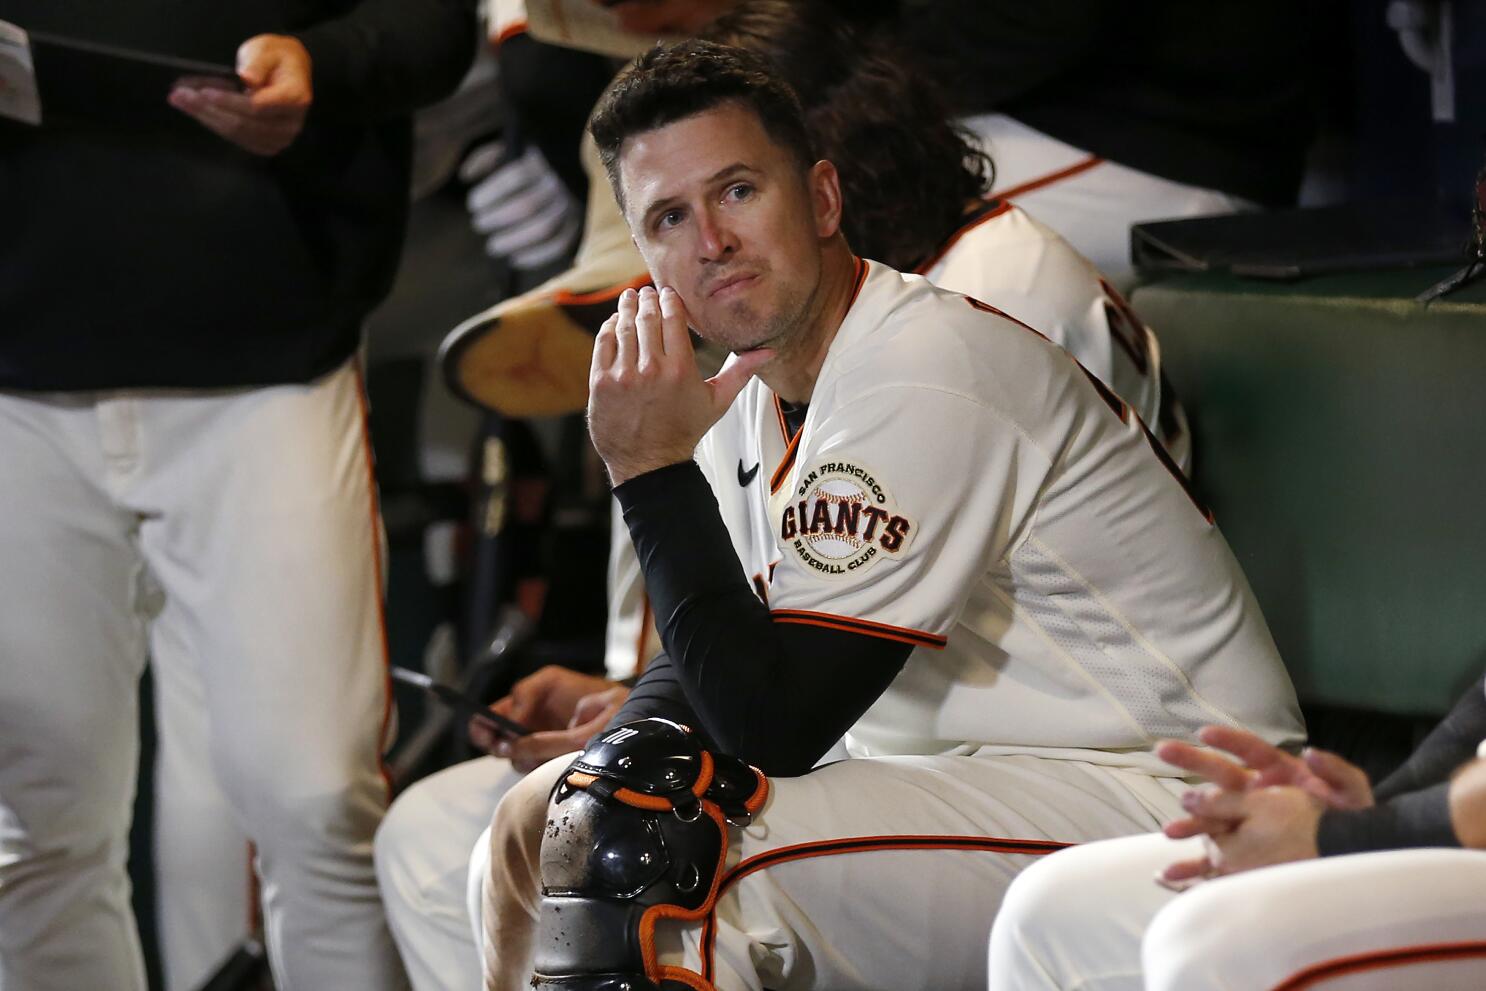 Giants catcher Buster Posey will announce retirement - Los Angeles Times